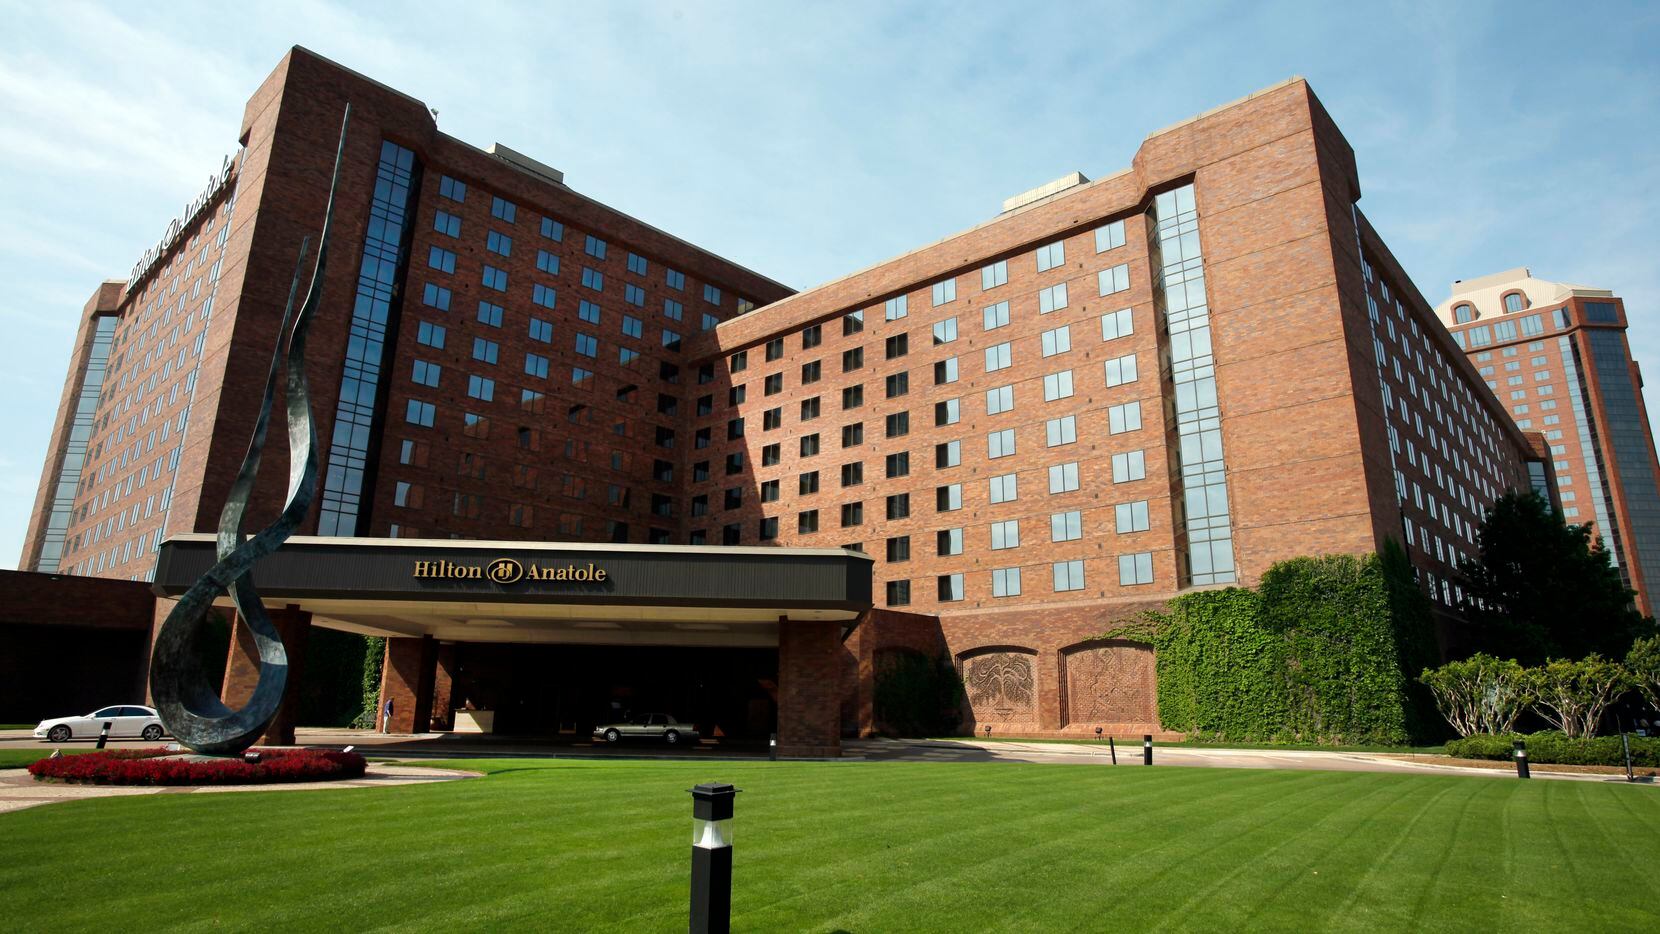 The Hilton Anatole opened in 1979 and is still one of North Texas' biggest hotels.